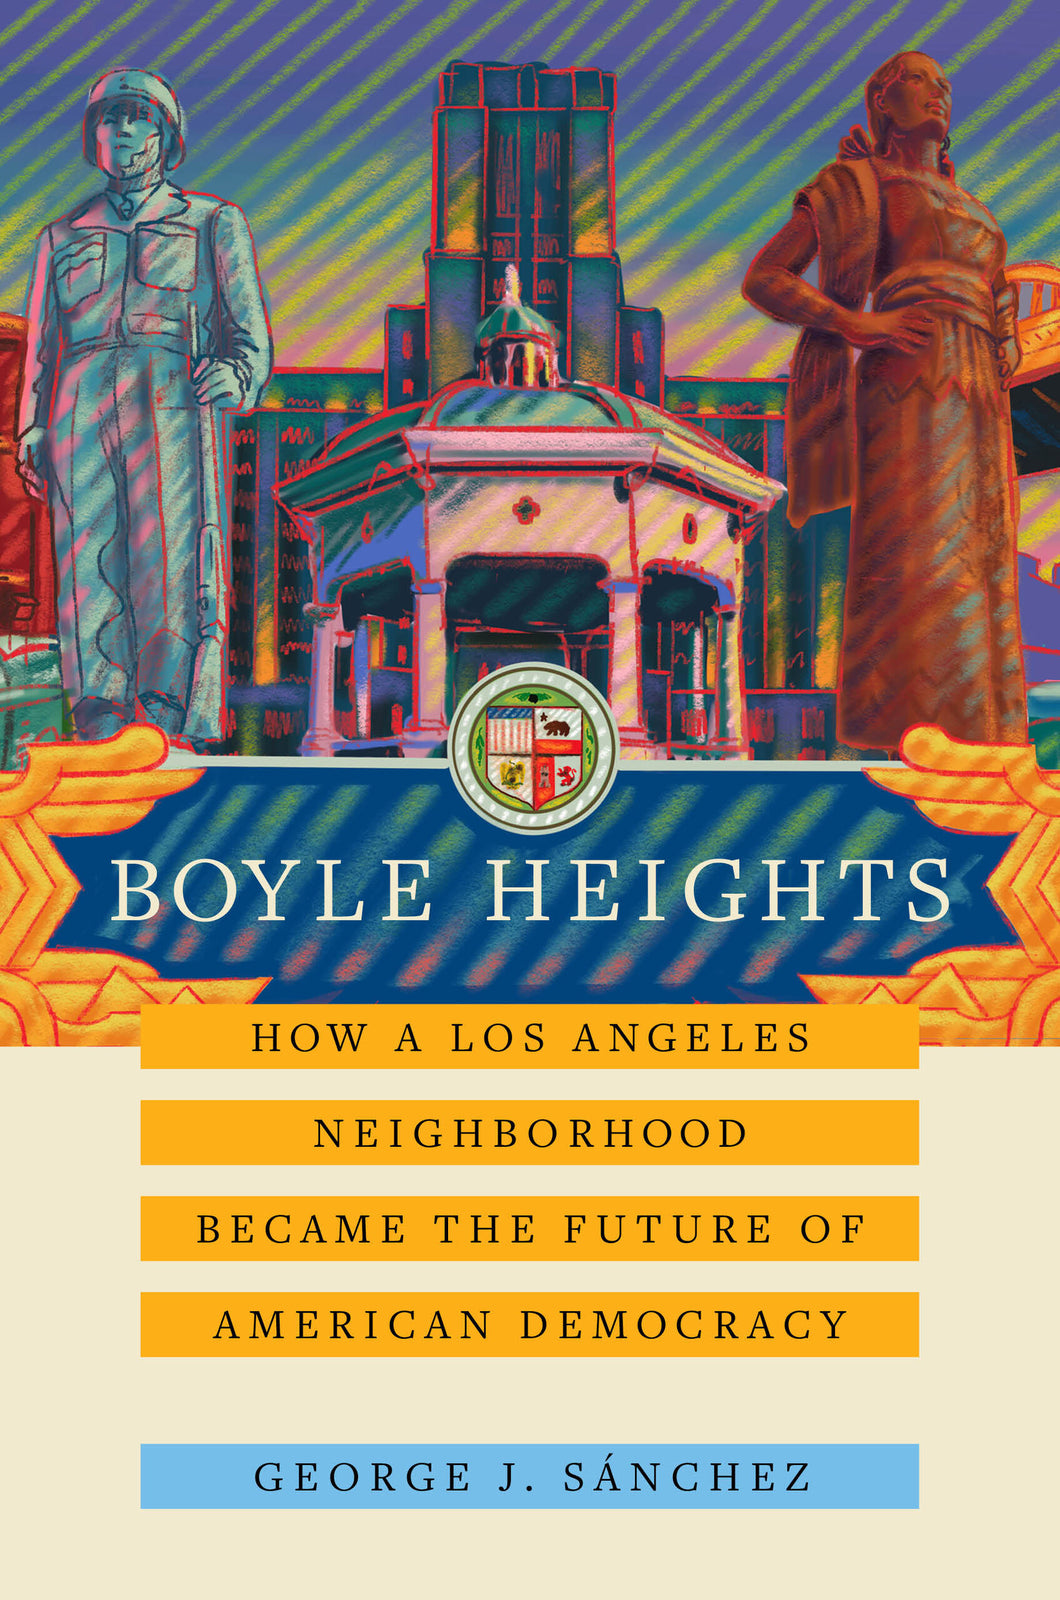 Boyle Heights: How a Los Angeles Neighborhood Became the Future of American Democracy by George J. Sánchez